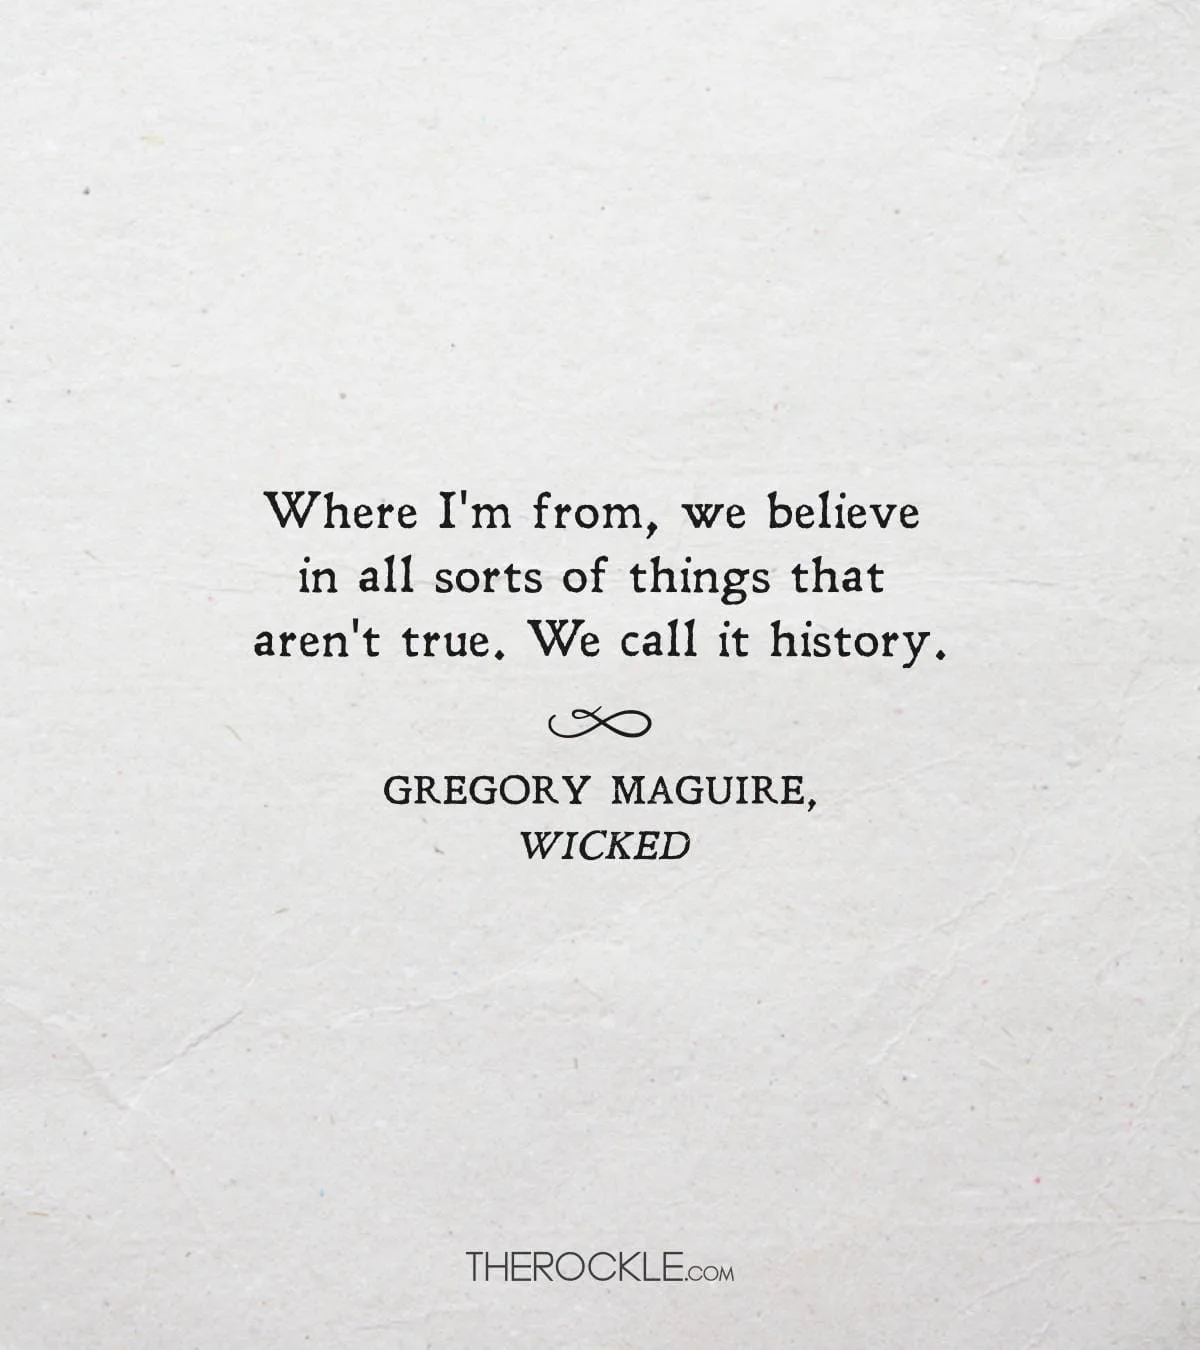 Quote from Gregory Maguire's book Wicked